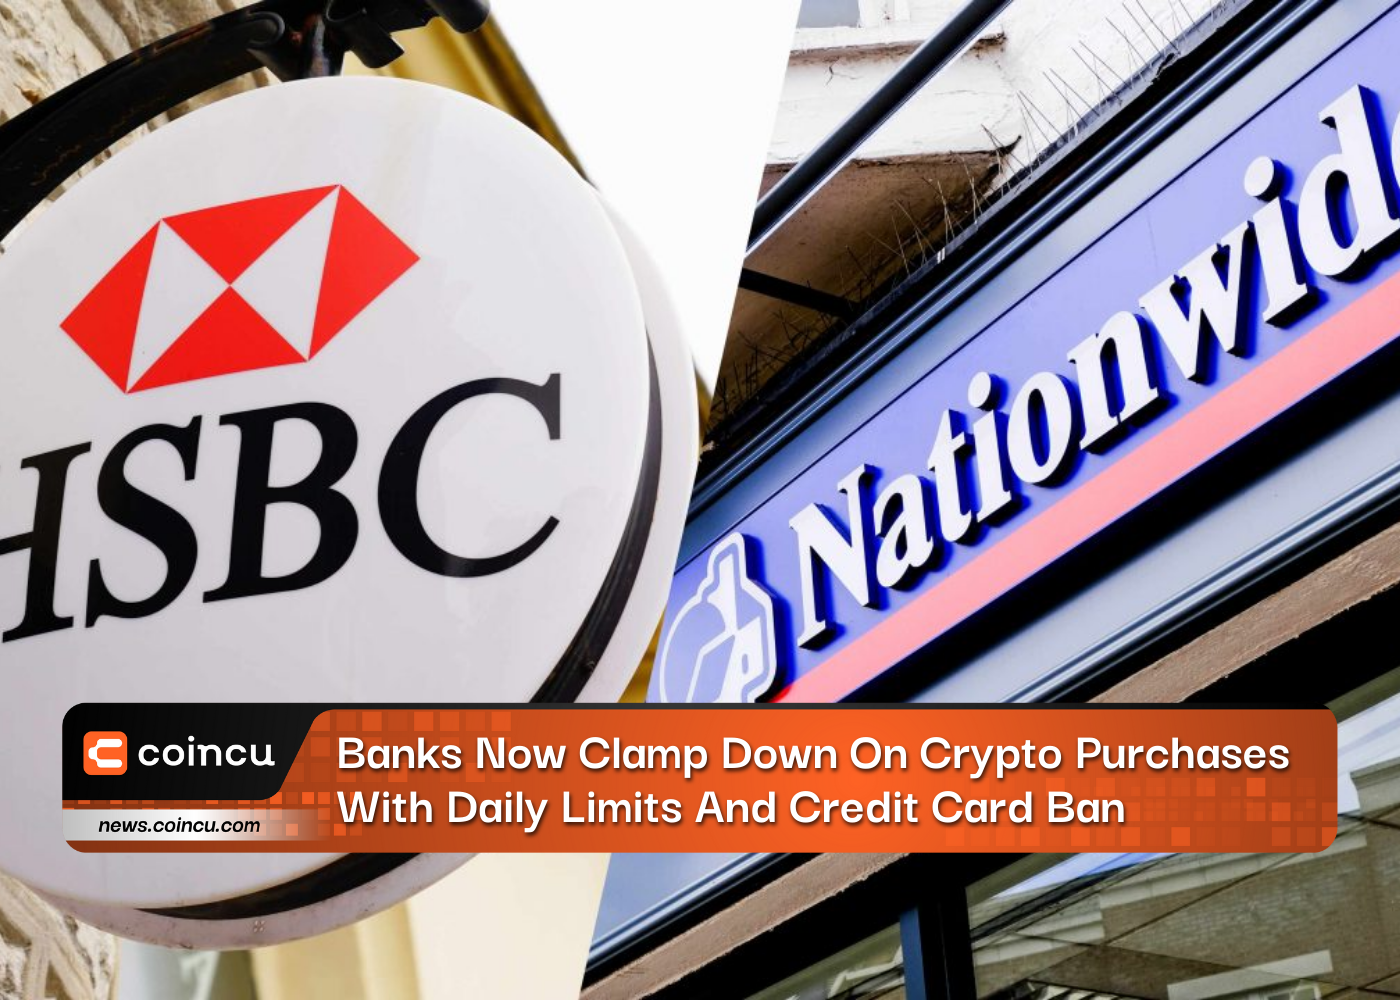 Banks Now Clamp Down On Crypto Purchases With Daily Limits And Credit Card Ban